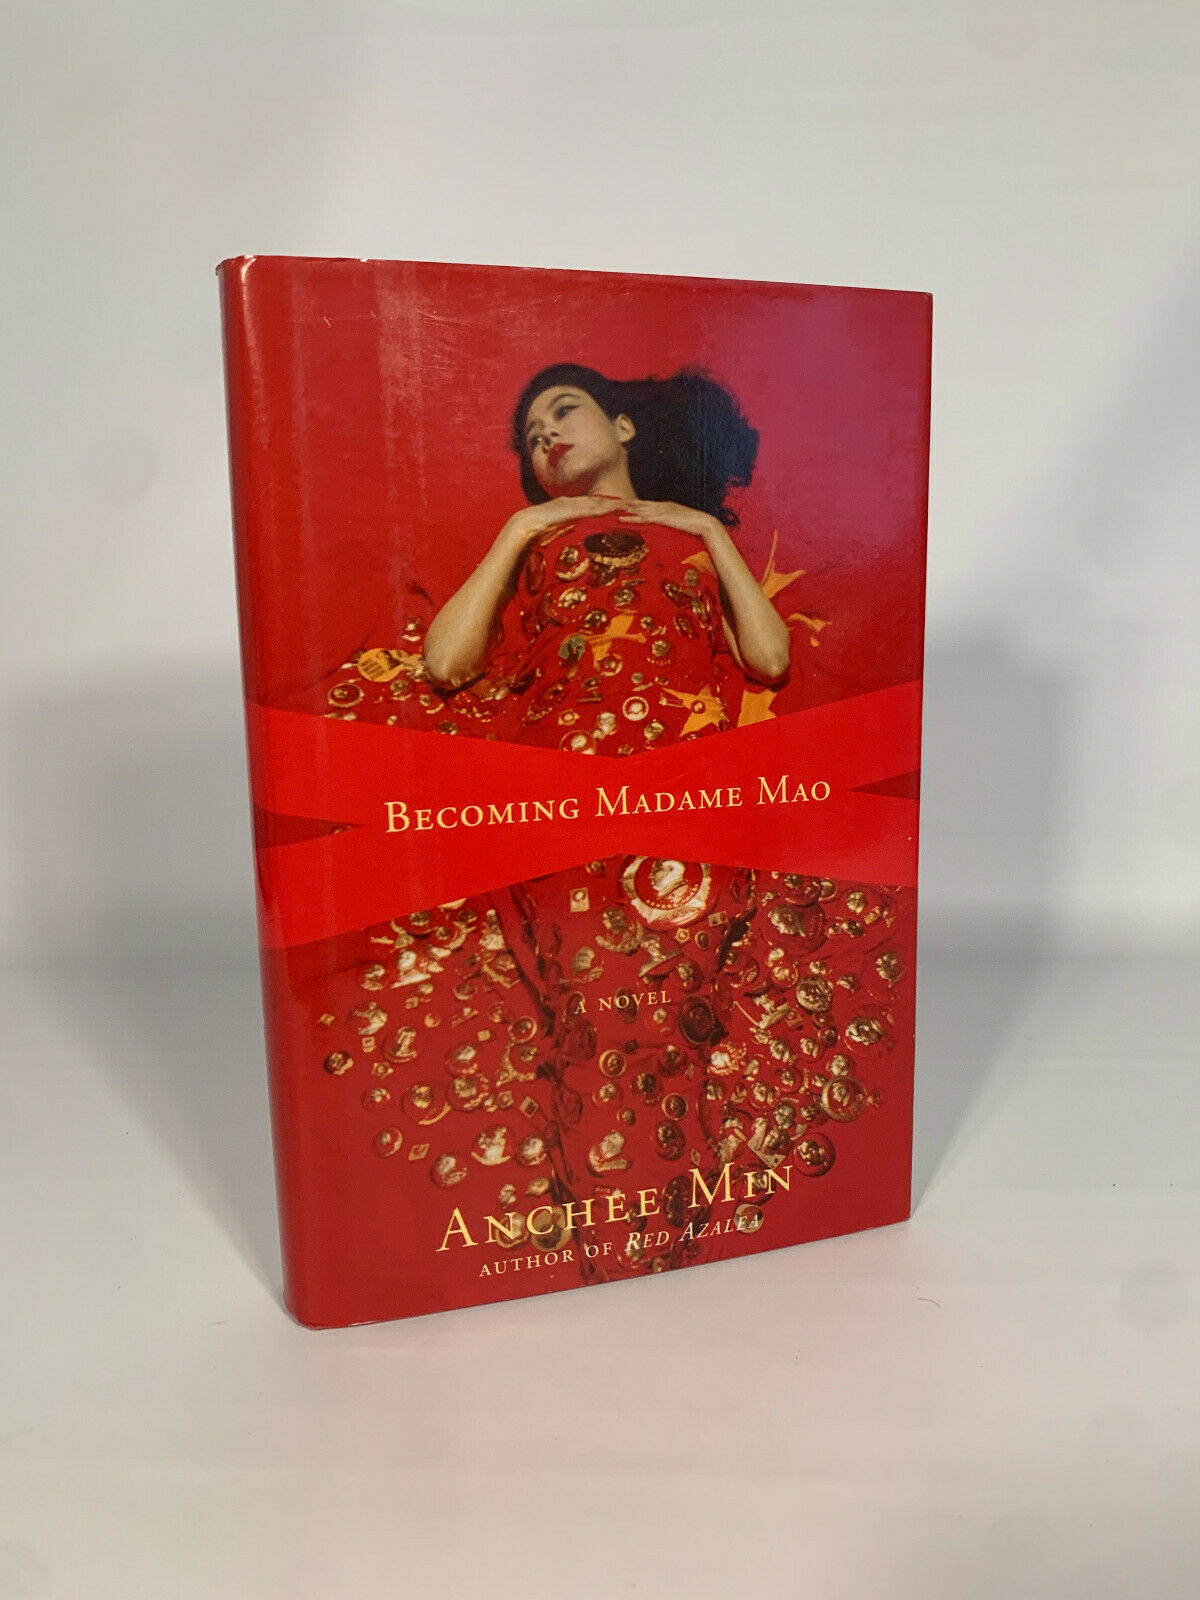 Becoming Madame Mao by Anchee Min Hardcover